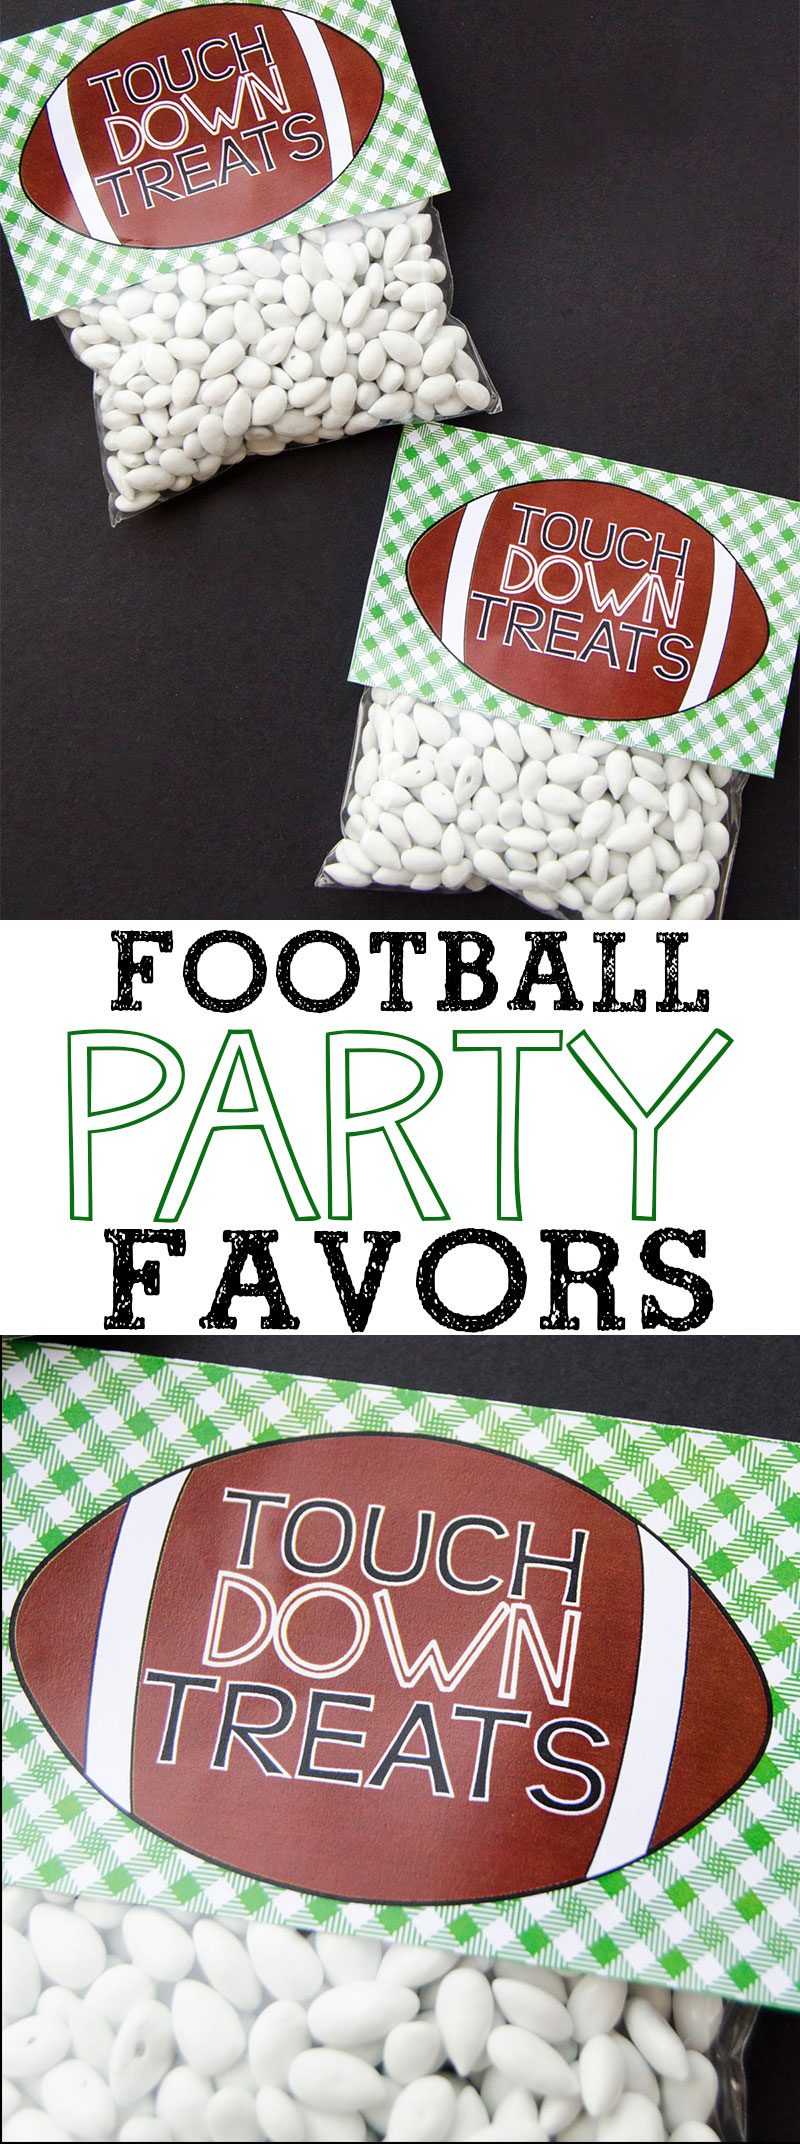 Football Party Favors by Lindi Haws of Love The Day